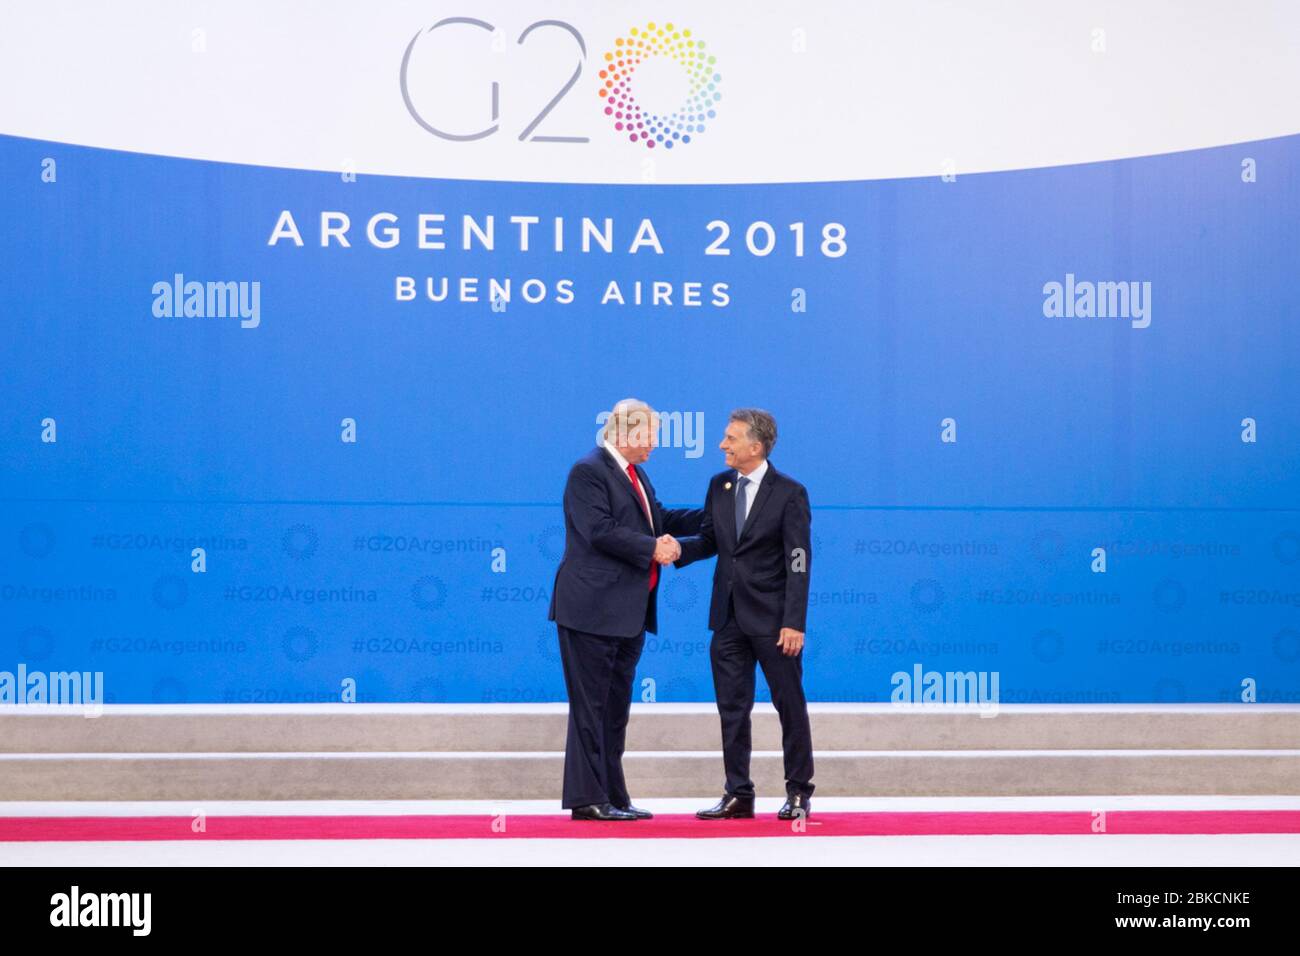 President Donald J. Trump and President Mauricio Macri of the Argentine Republic appear on stage during the G20 welcoming ceremony in Buenos Aires, Argentina. President Donald J. Trump at the G20 Summit Stock Photo